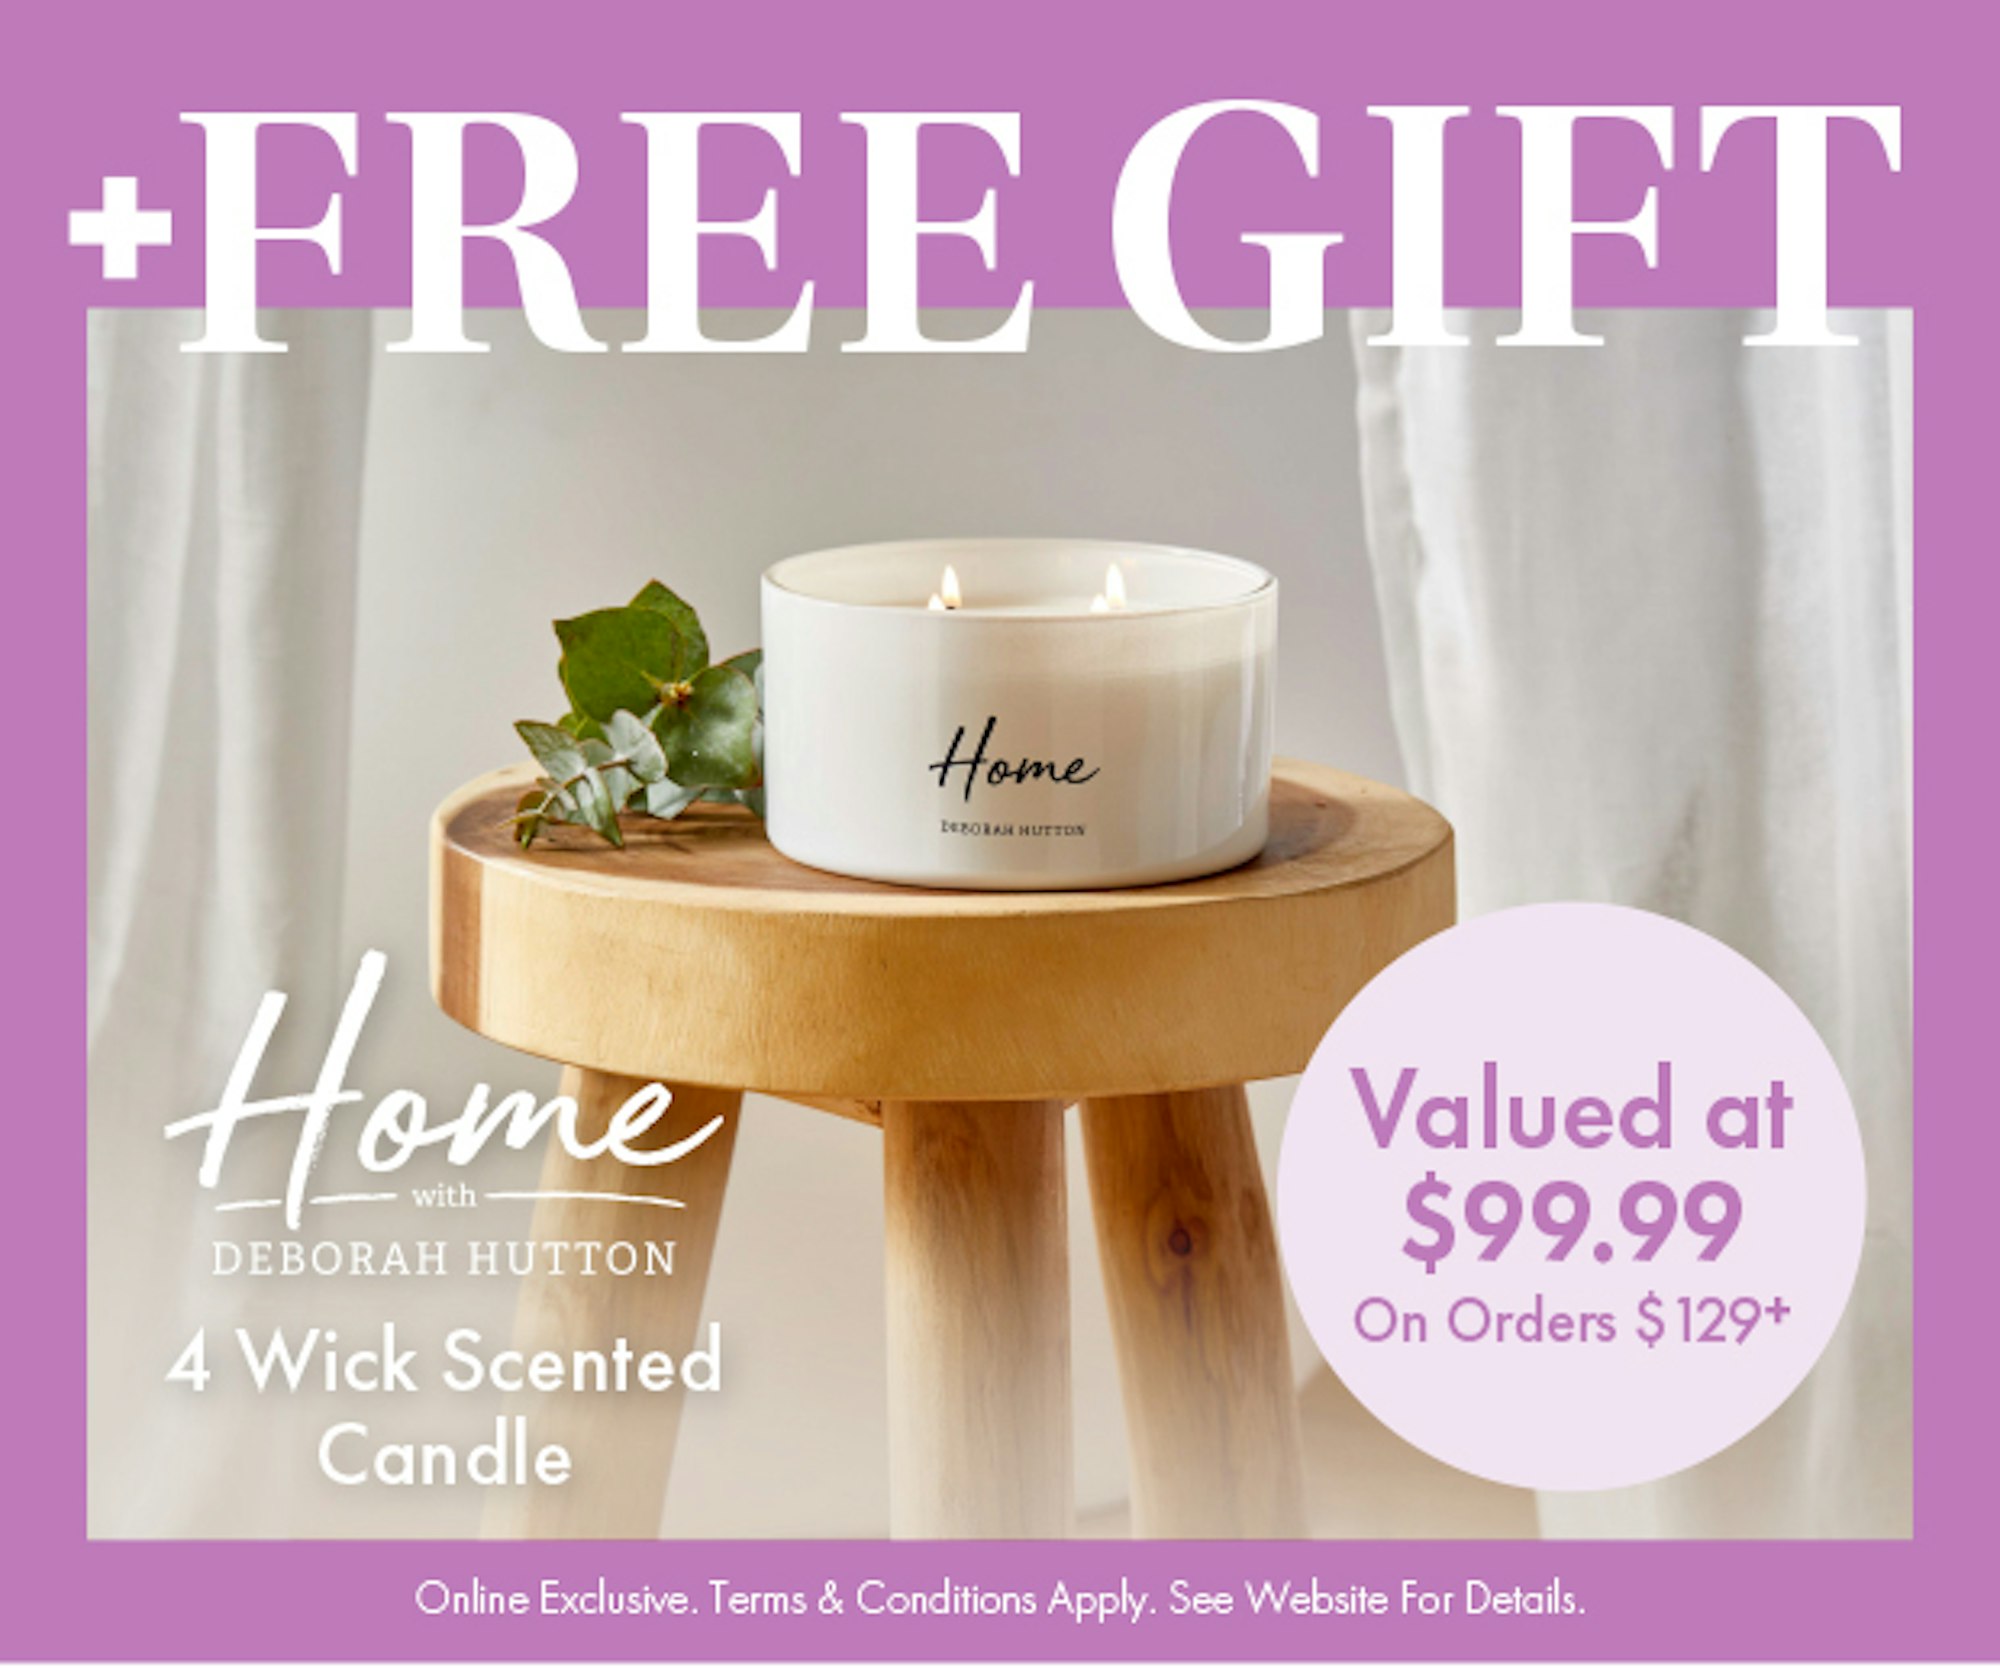 Mother's Day Free Gift Offer